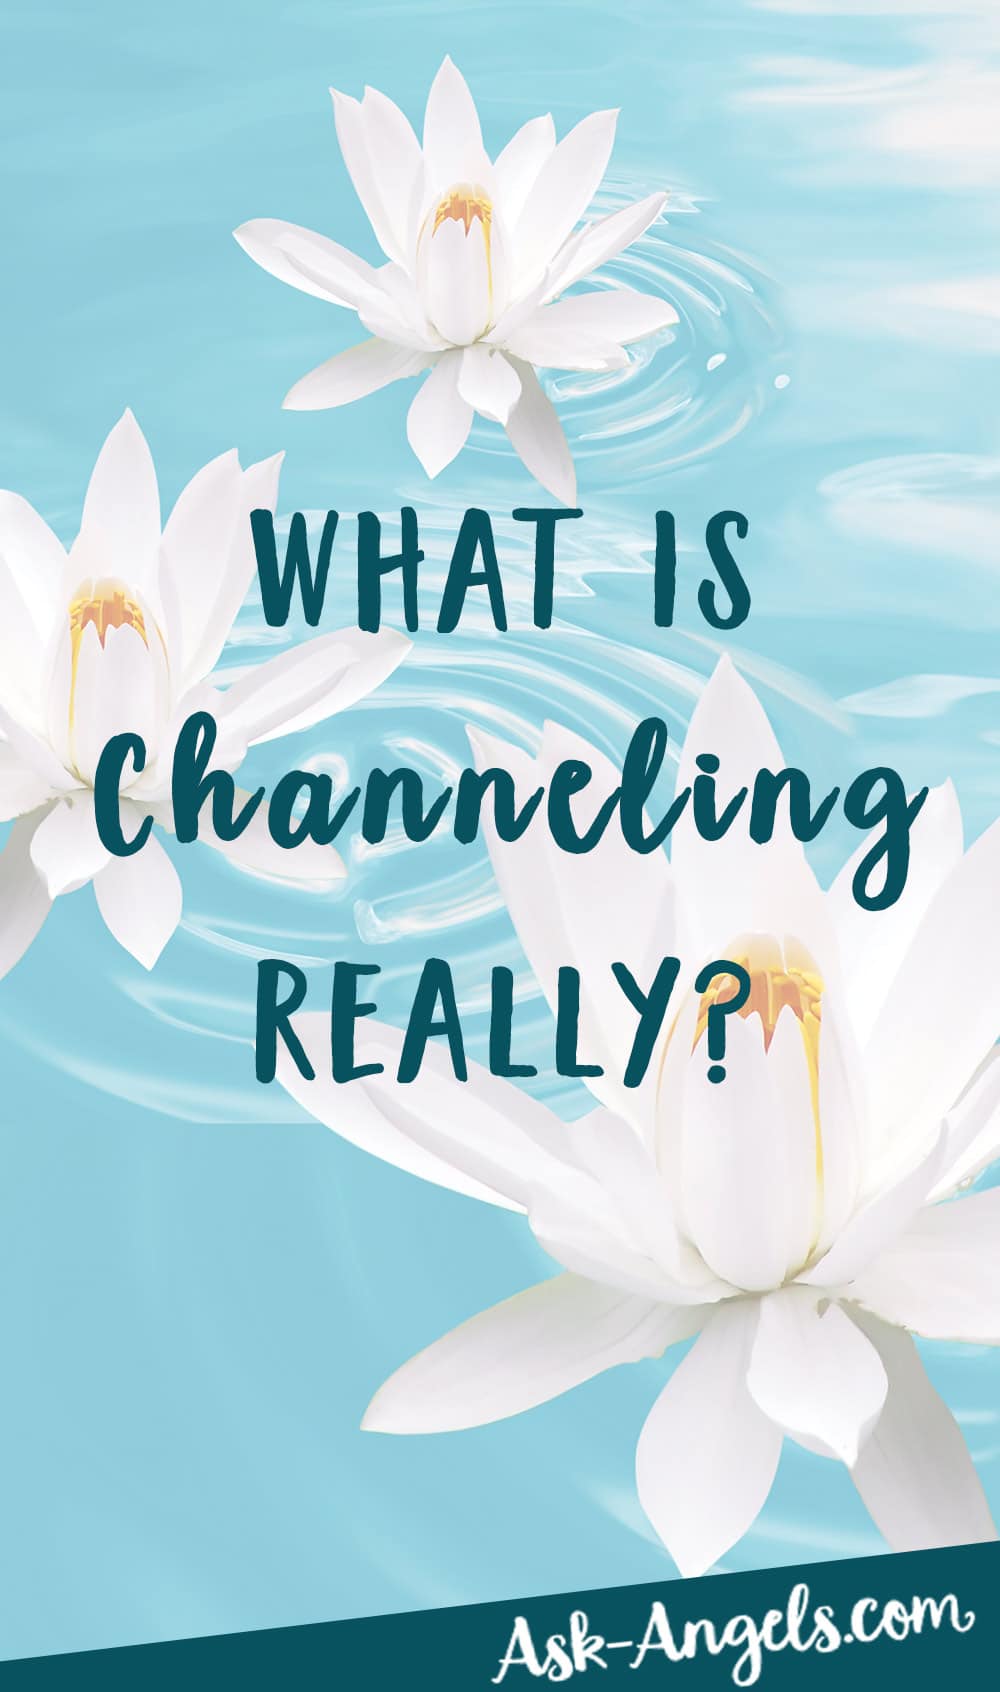 What Is Channeling?